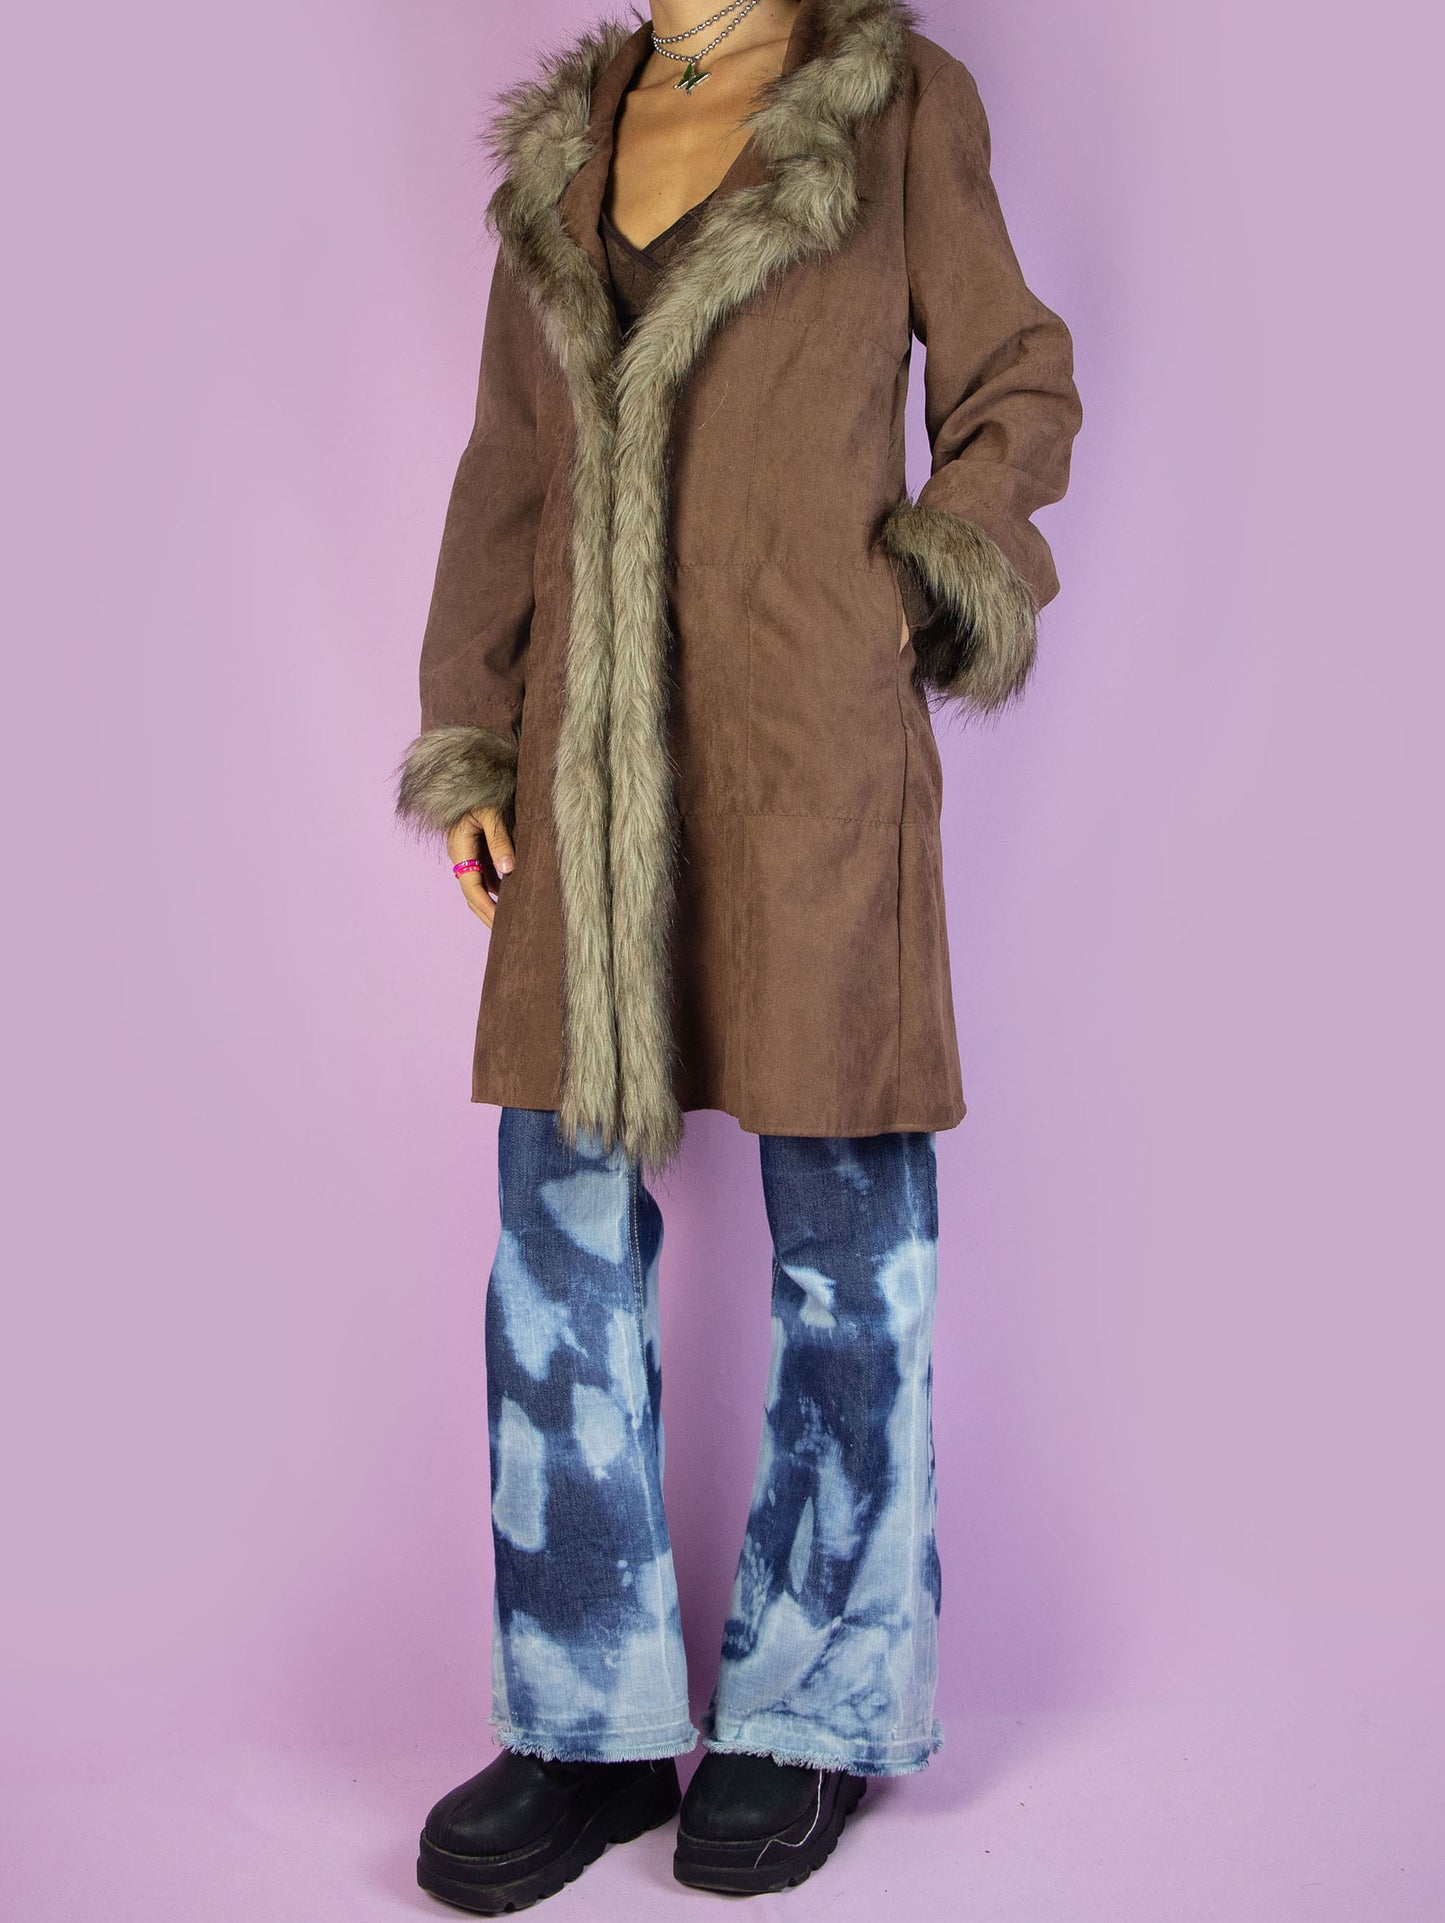 The Y2K Brown Penny Lane Coat is a vintage 2000s afghan-inspired faux suede statement jacket with faux fur collar and cuffs, featuring pockets and a tied front.